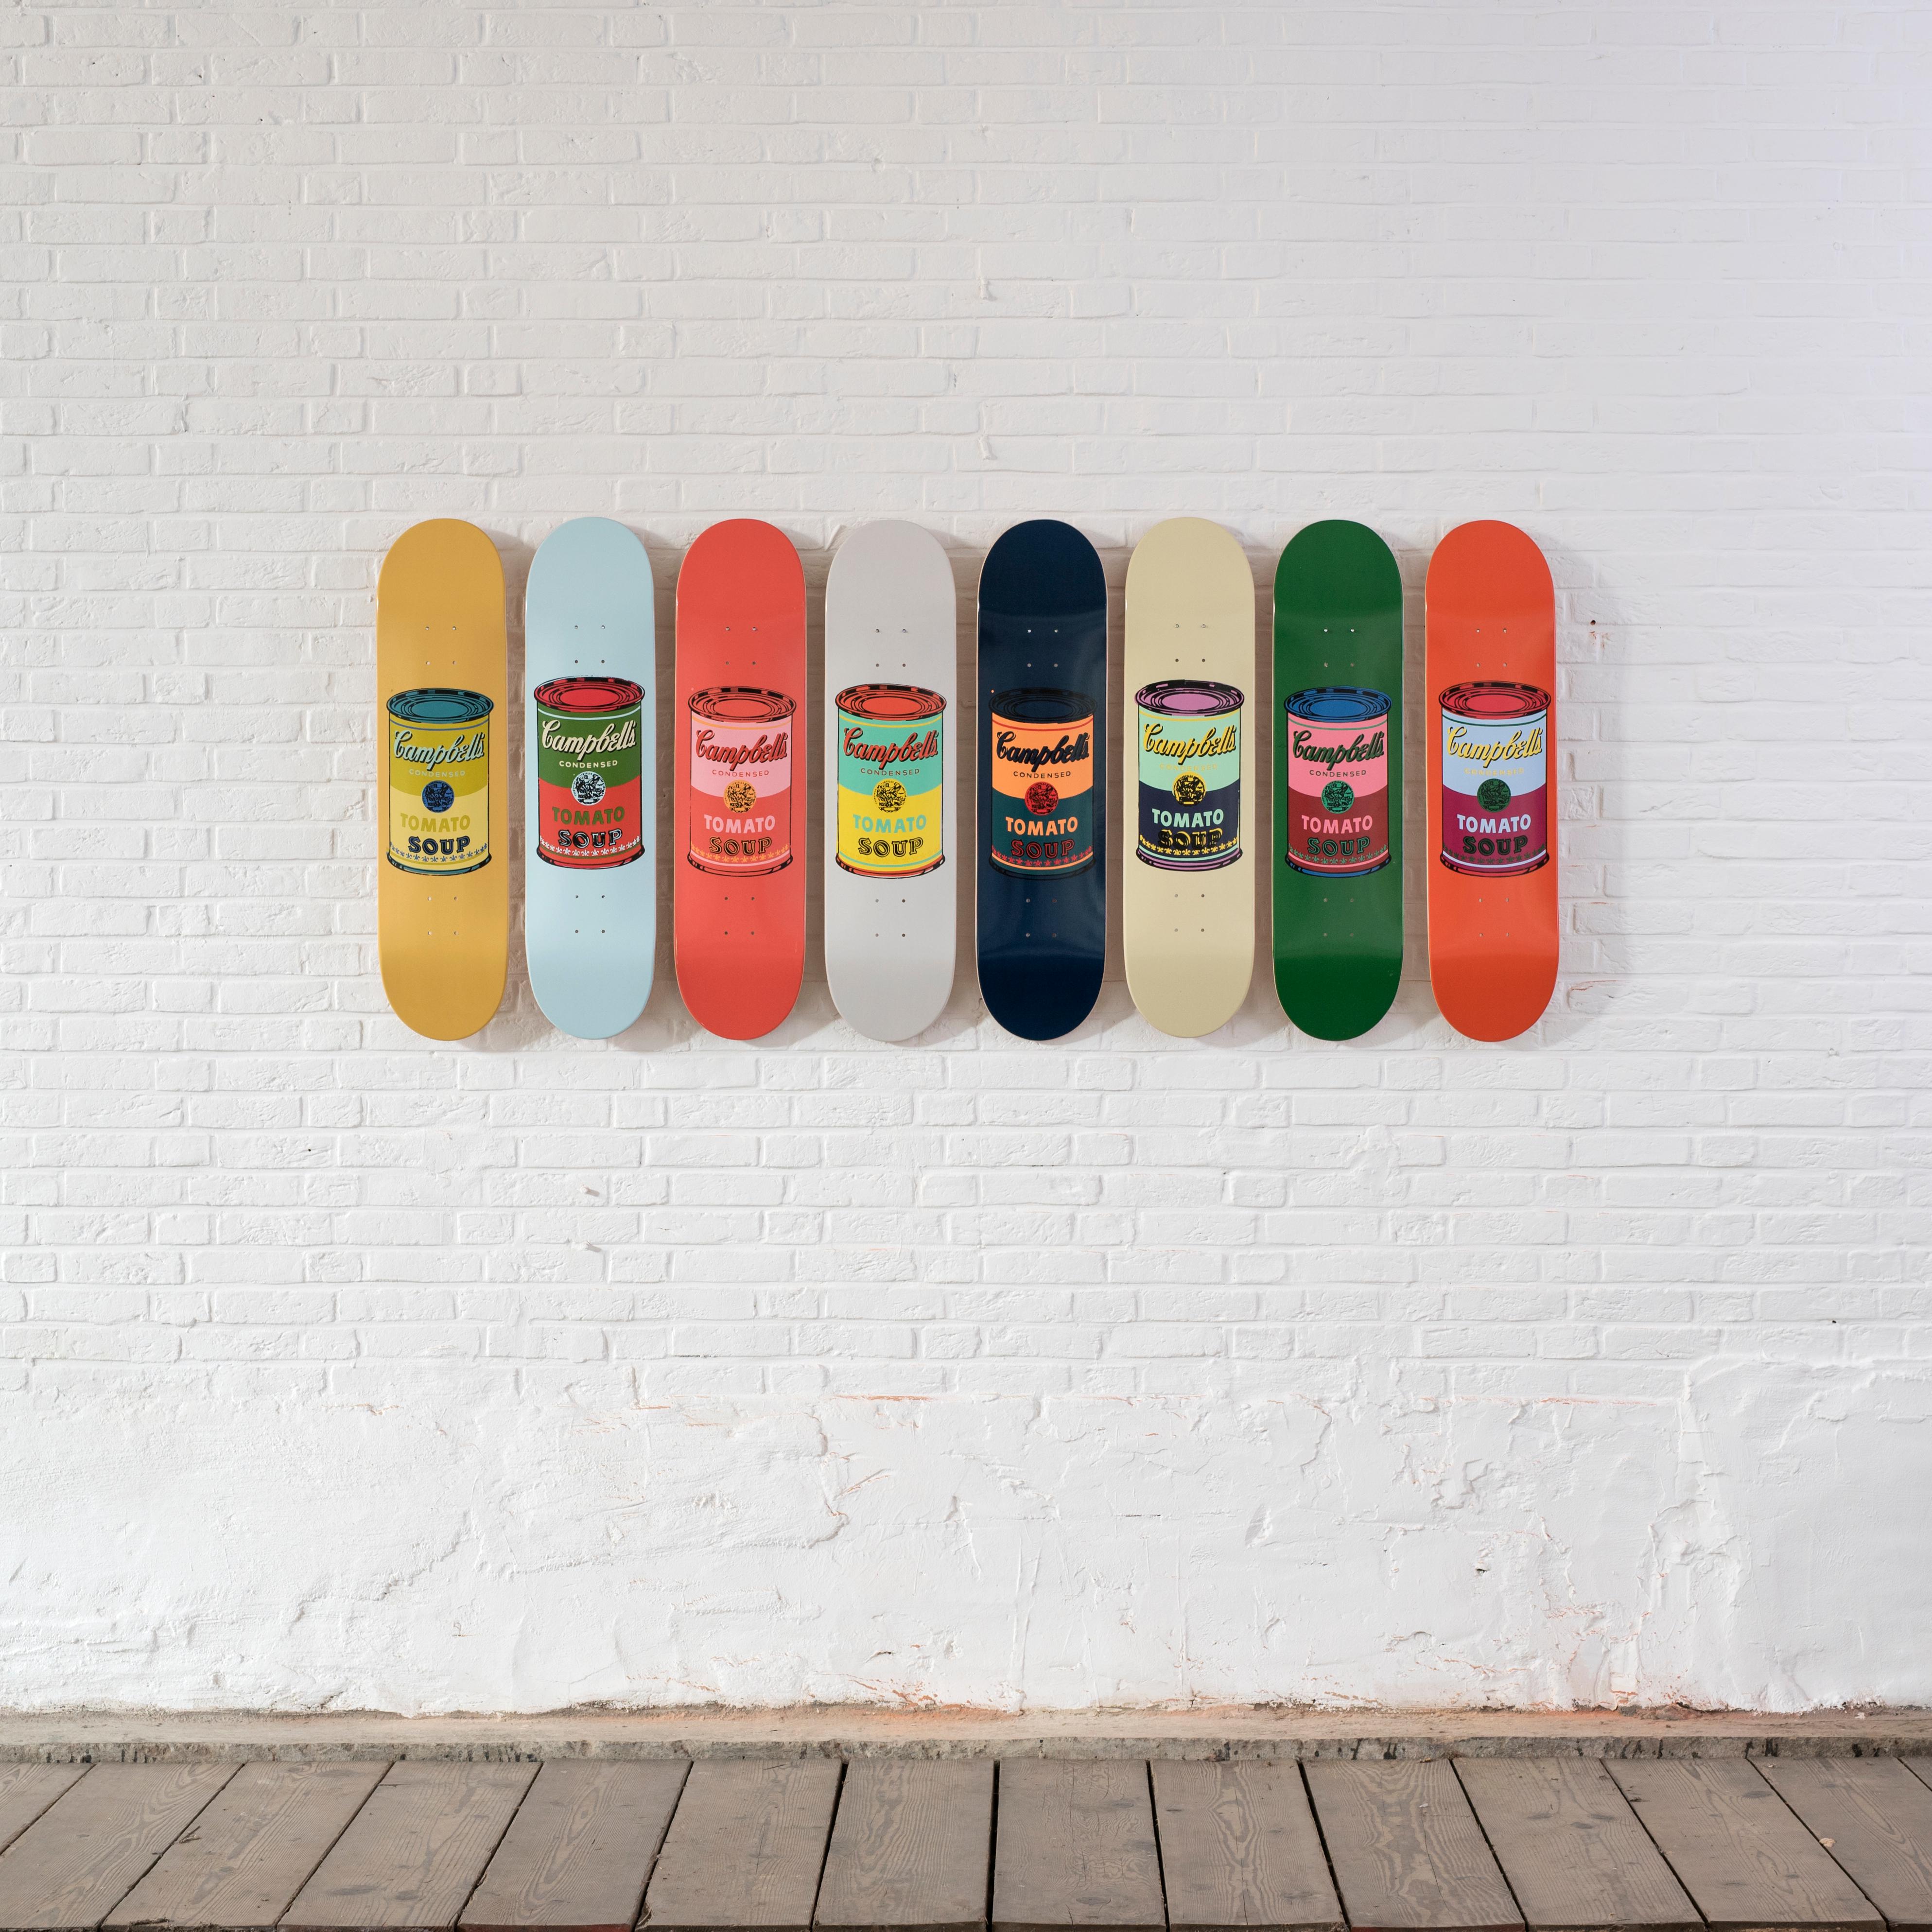 Set of 8 skateboard decks
7-ply Canadian Maplewood with screen-print
Measures: 31 h. x 8 inches
mounting hardware included
open edition (screen-printed signature)
The Andy Warhol Foundation for the Visual Arts, Inc.
Produced by The